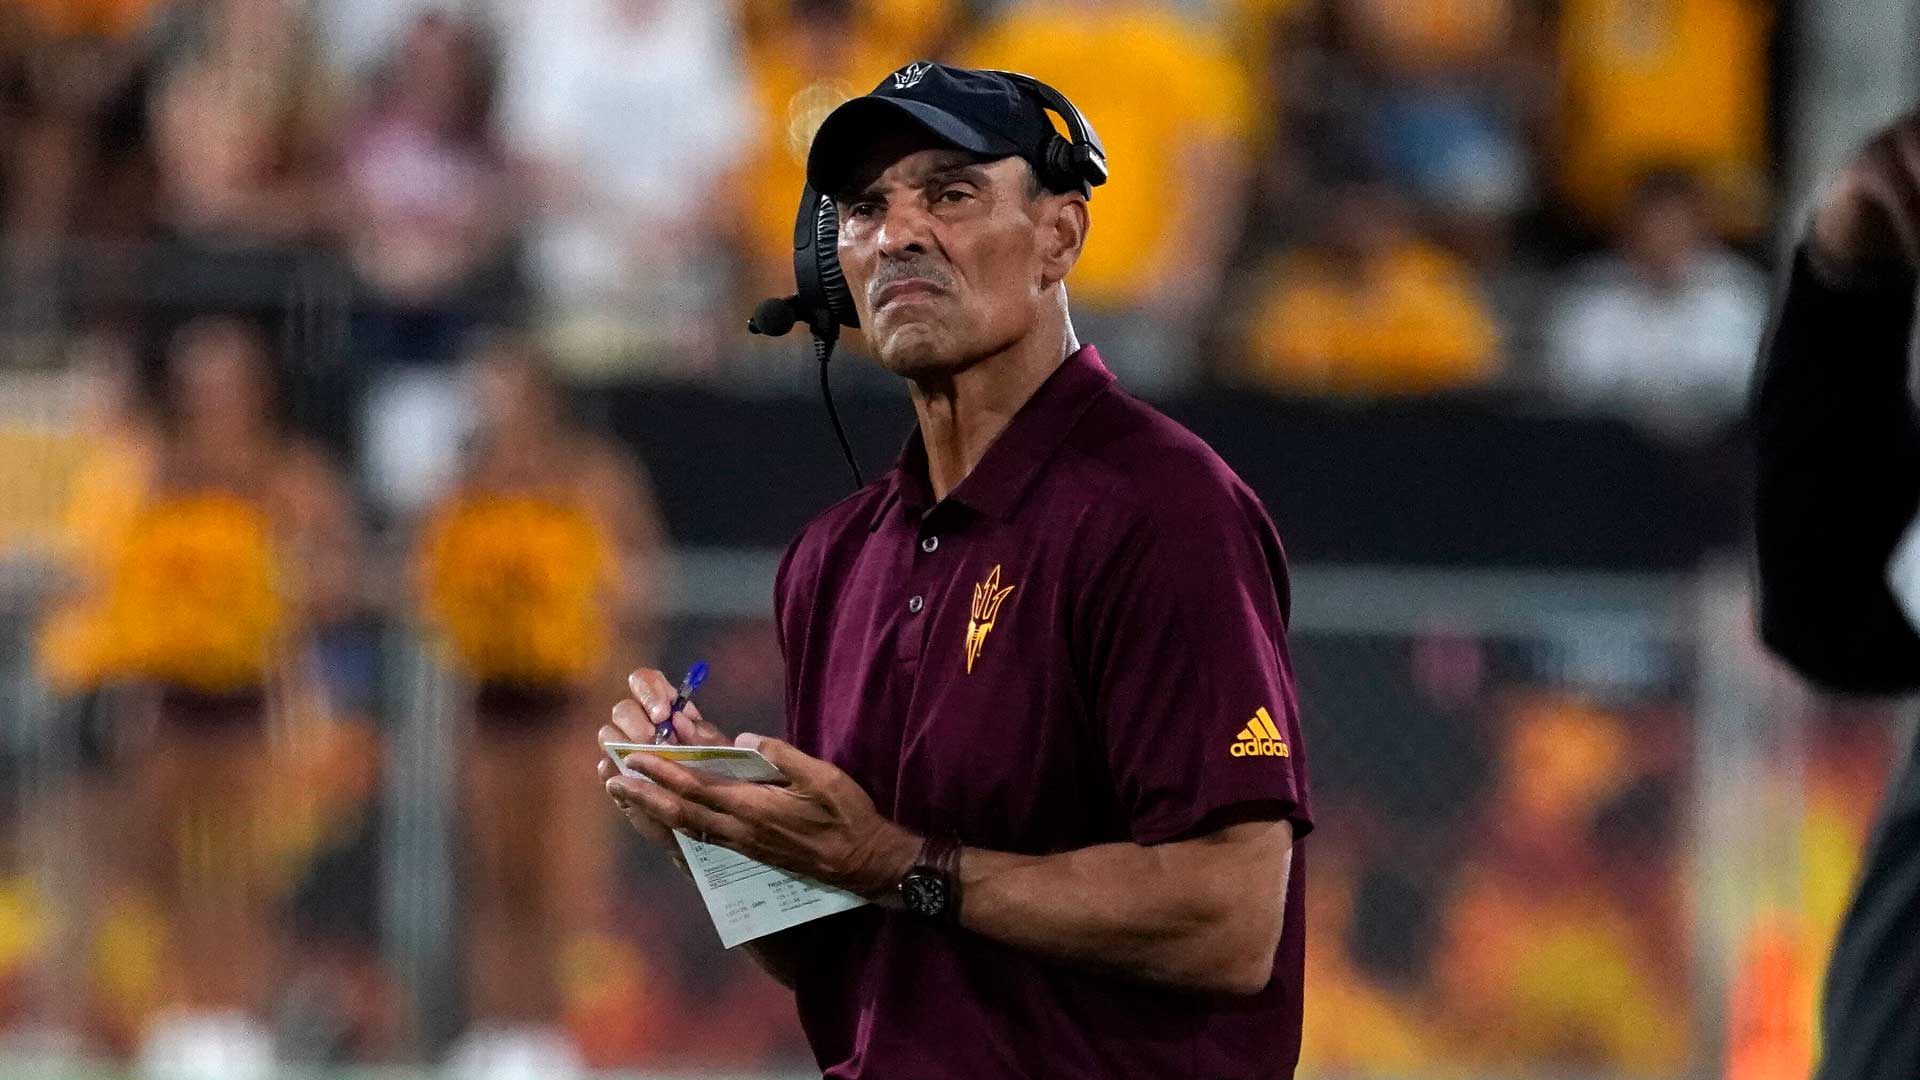 Arizona State coach Herm Edwards looks toward the scoreboard with his team his down against Eastern Michigan during the first half of an NCAA college football game Saturday, Sept. 17, 2022, in Tempe, Ariz.